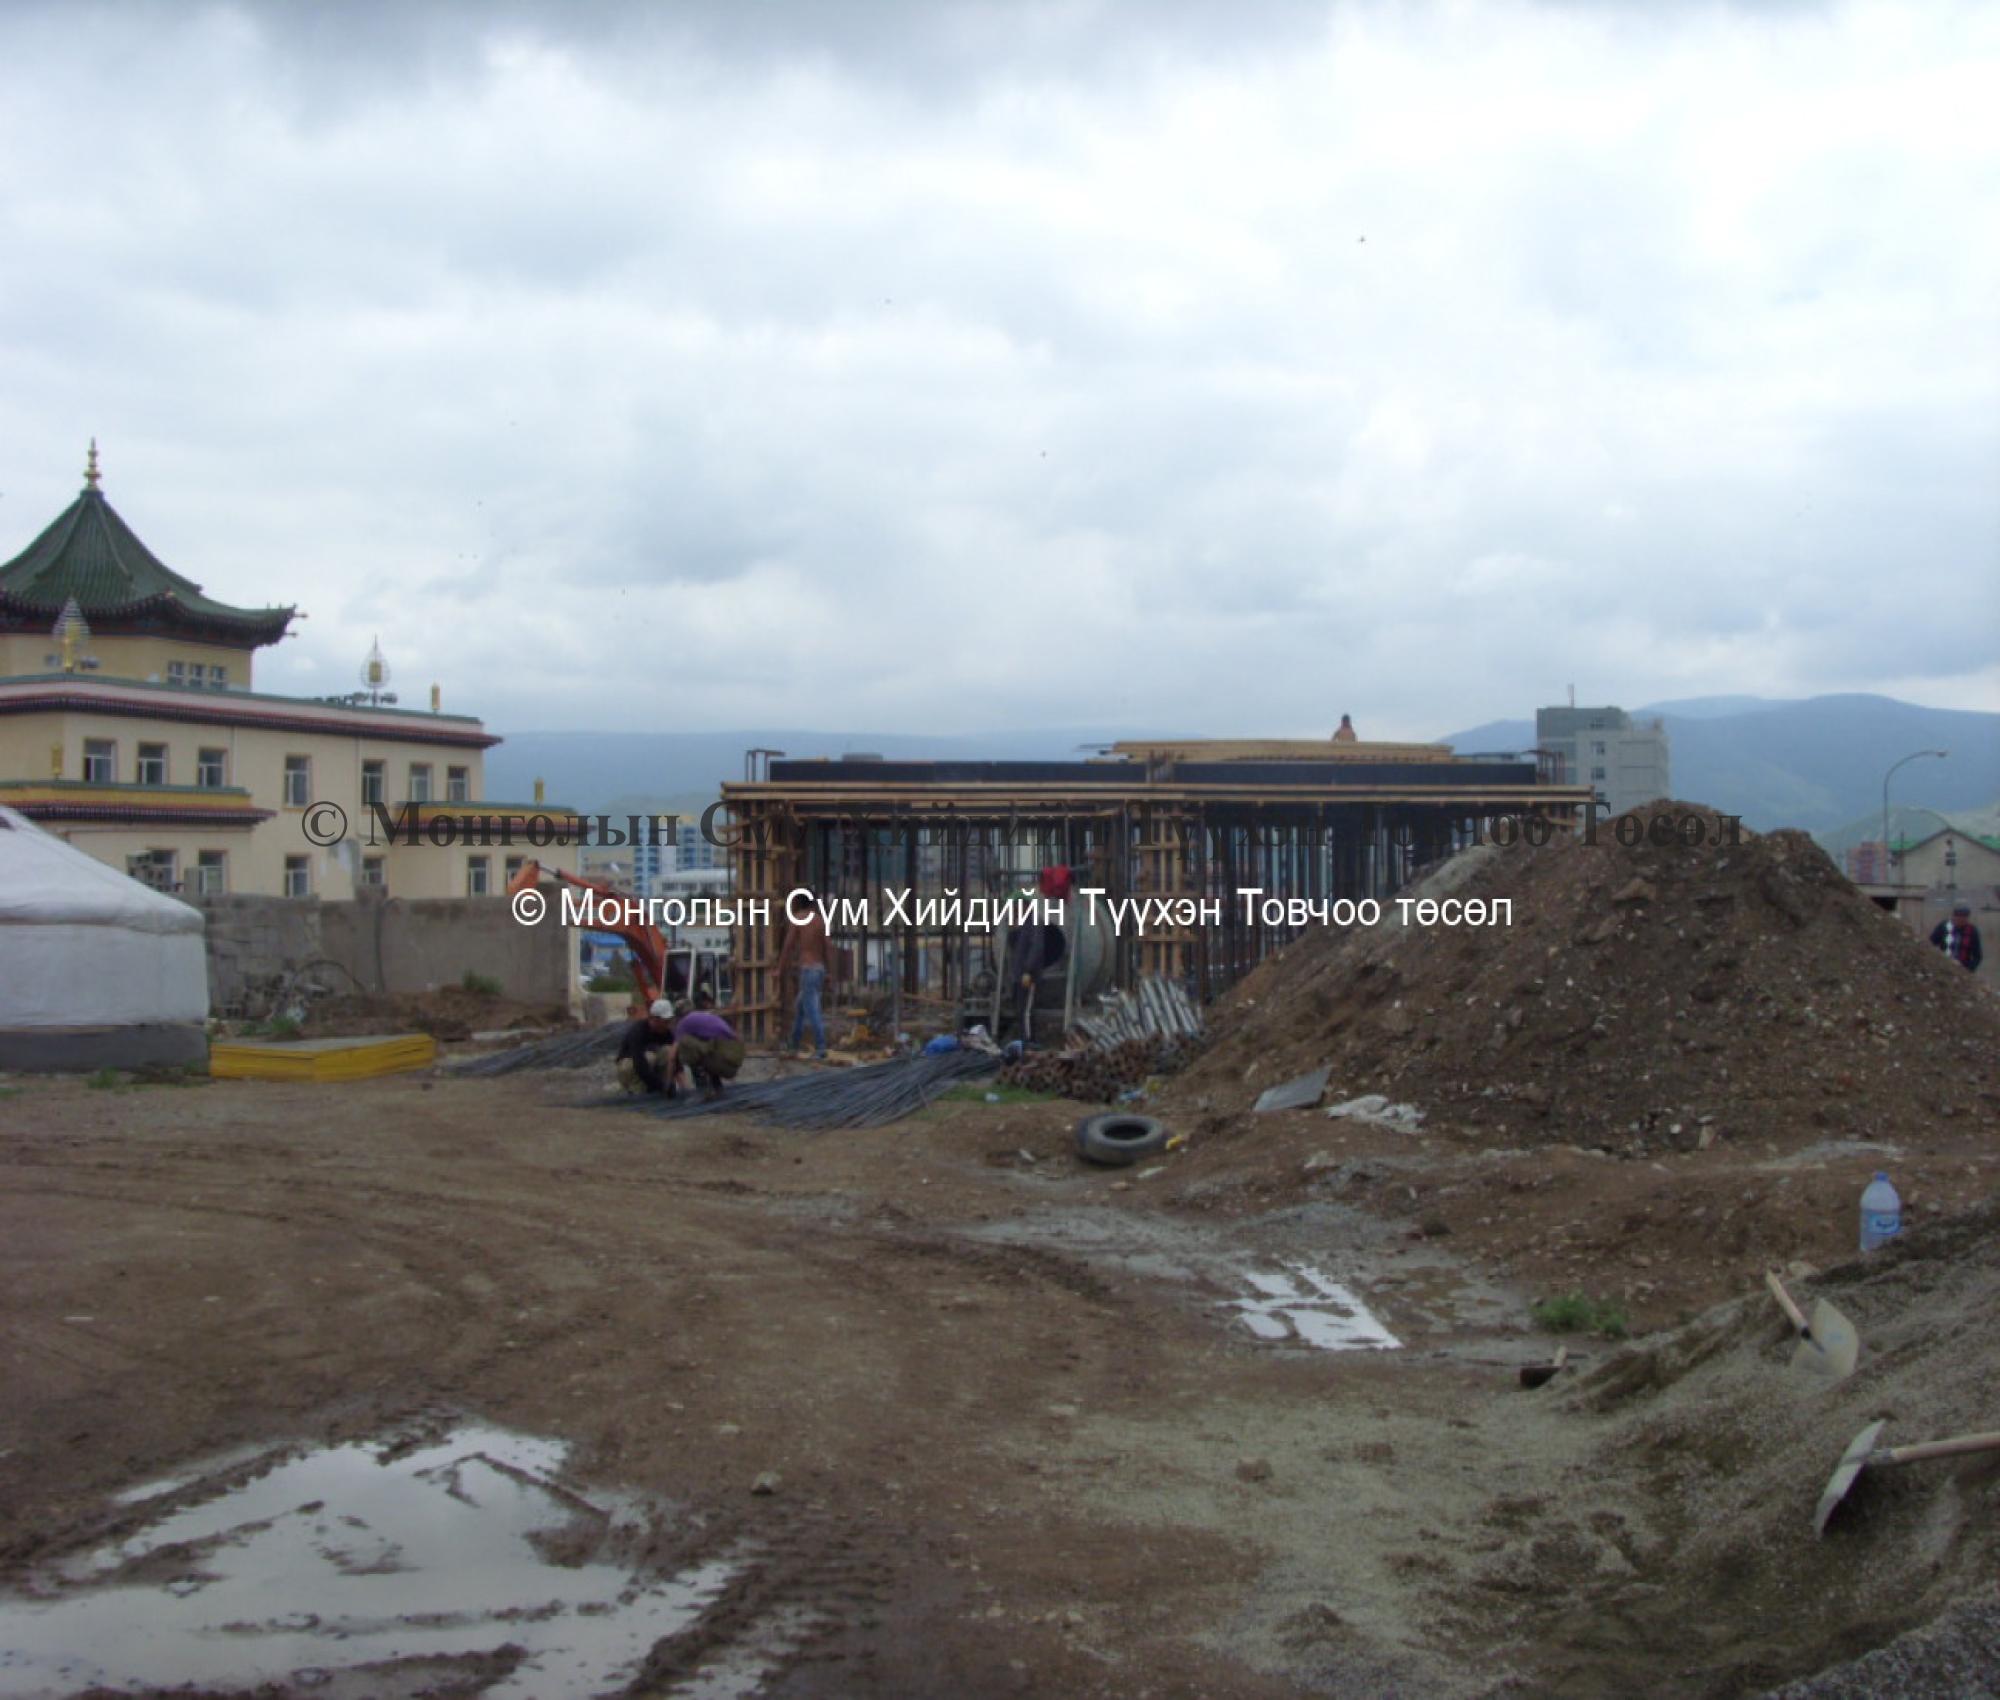 Another building is being built behind the temple 